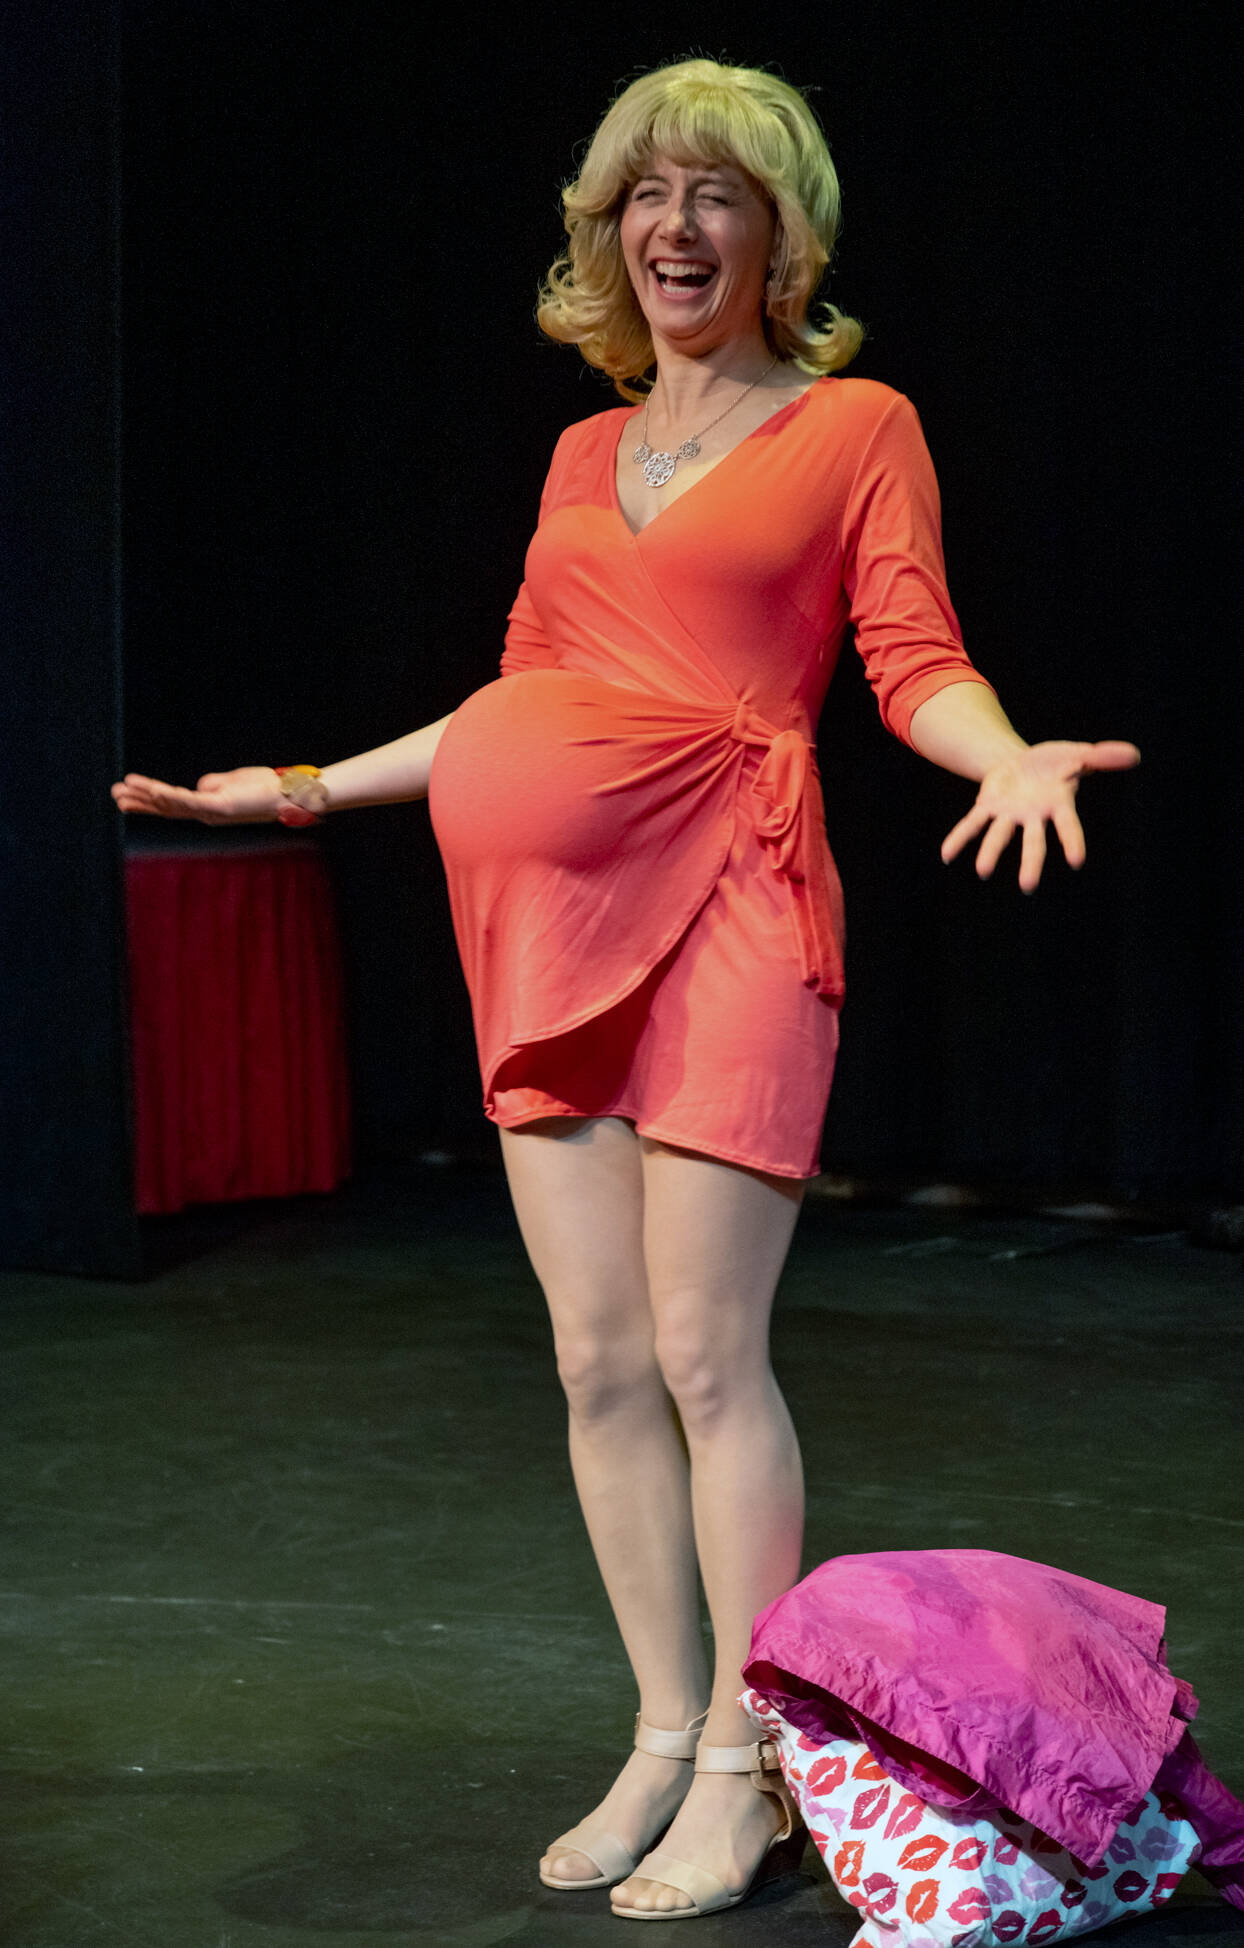 Mindy Gelder shares a laugh as she tests a balloon in skirt for a flashback scene at the bingo hall in a rehearsal for Bingo A Winning Musical at Olympic Theatre Arts in Sequim. Sequim Gazette photo by Emily Matthiessen